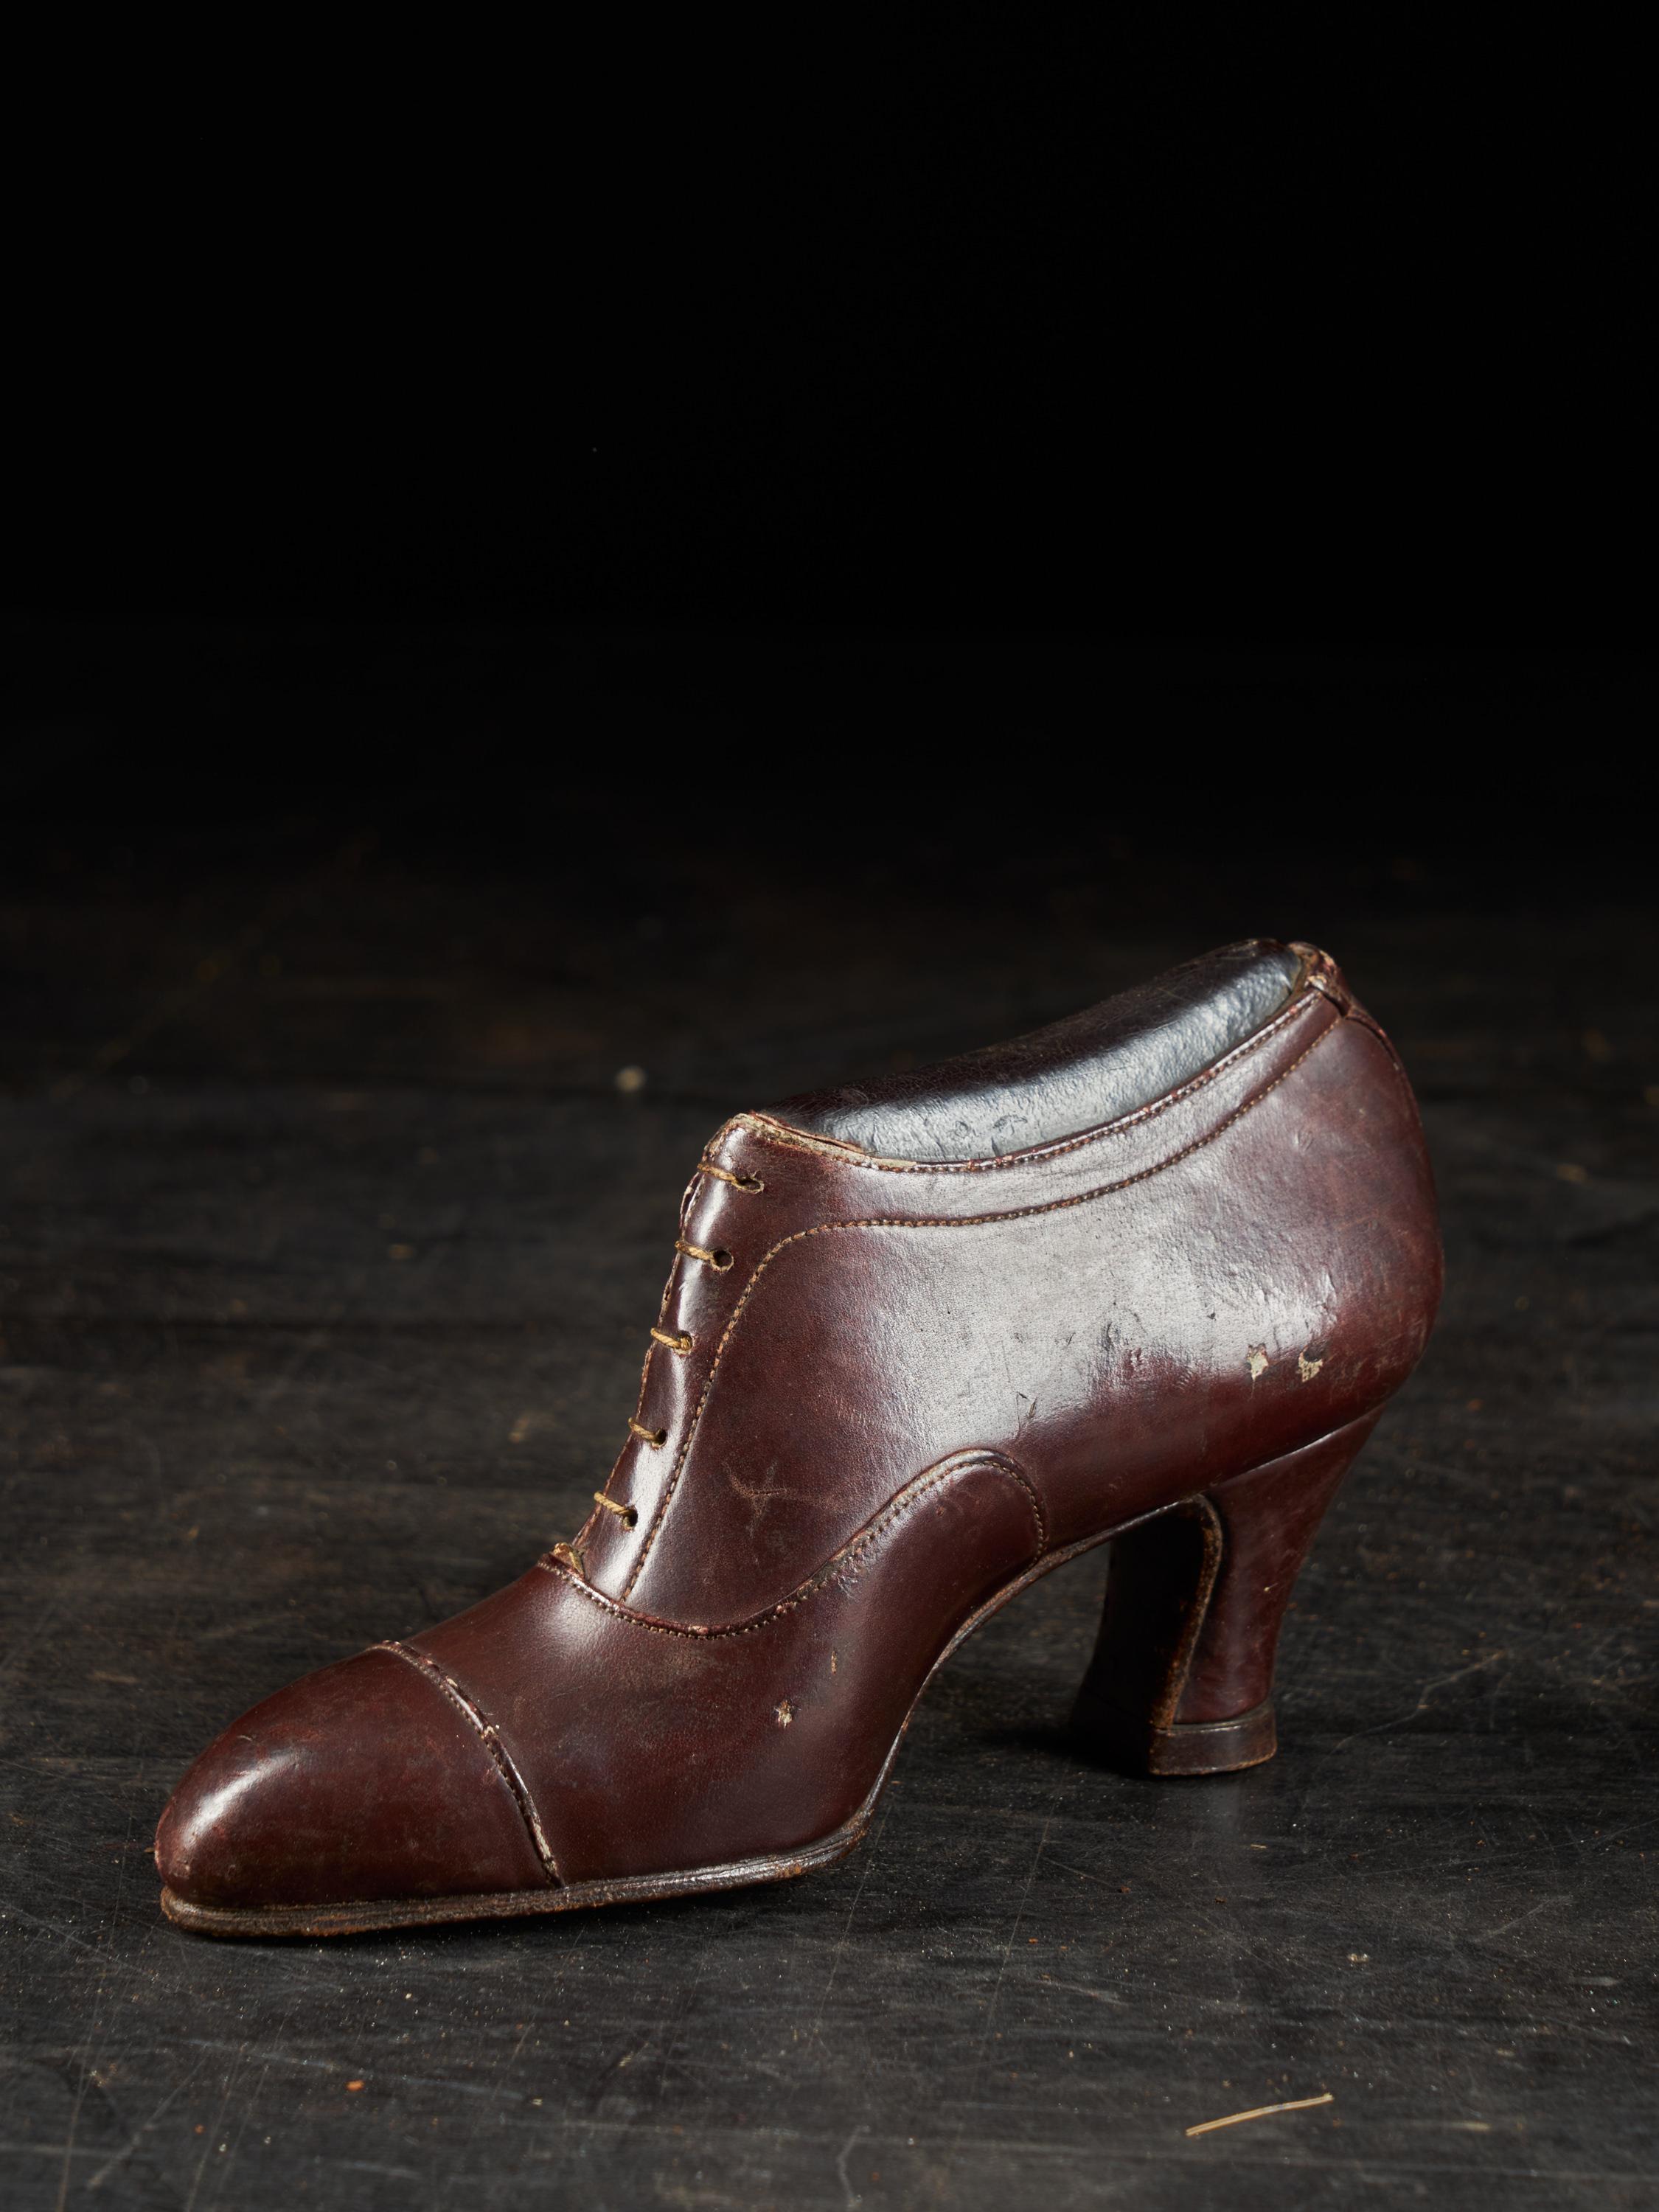 These three shoes were used by a shoemaker as basic show models from which customers could choose. He would then manufacture a customized pair. The three model show age and use related patina.

Measures: Between 11 x 5.5 x 6 and 17 x 5.5 x 9.